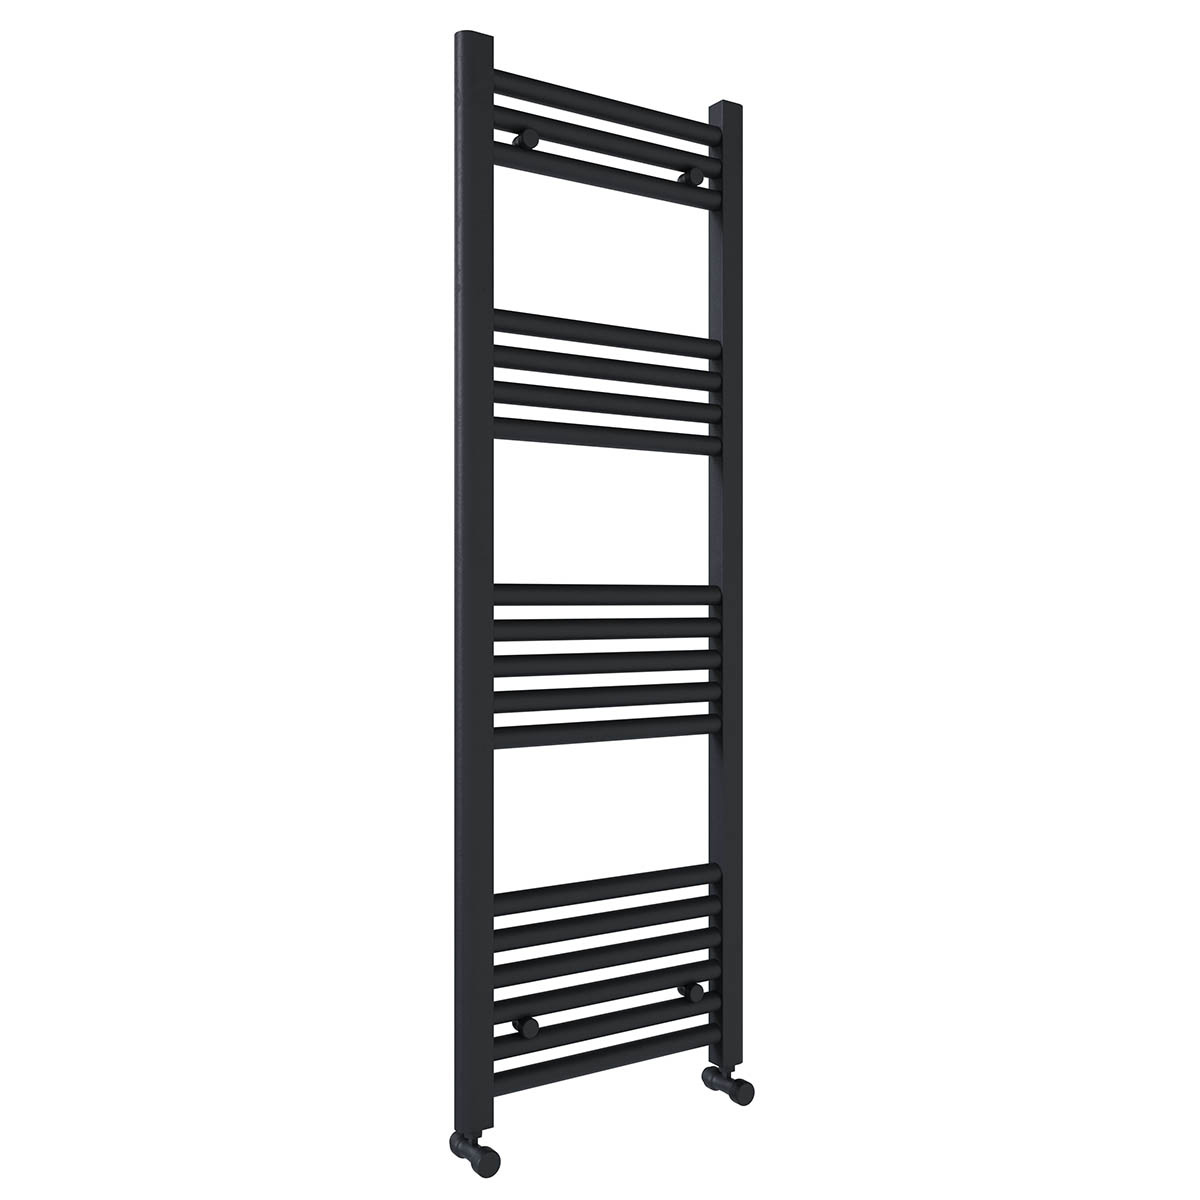 Roma Straight Heated Towel Rail - 1200mm x 400mm - Anthracite (11053)